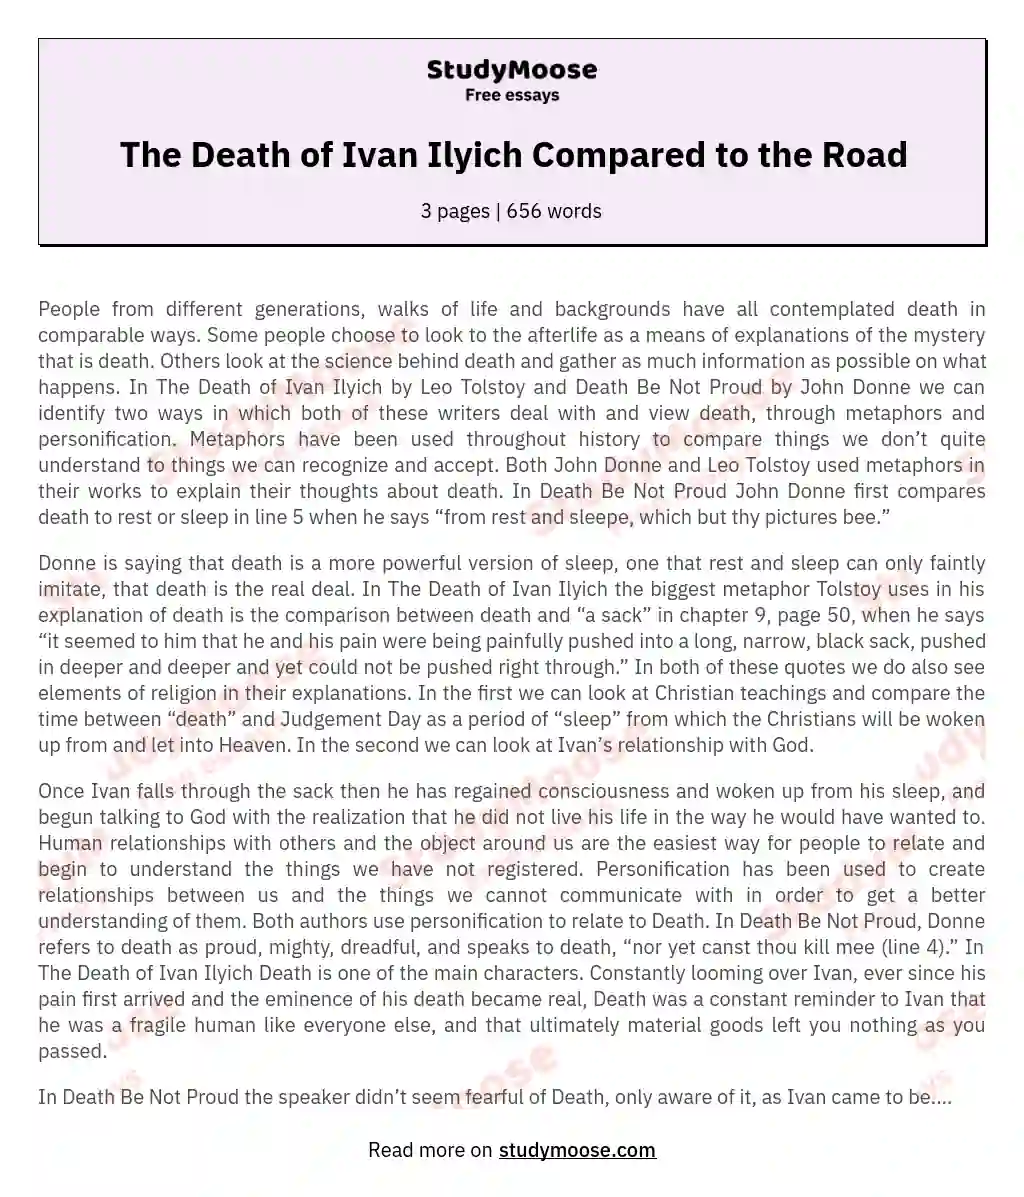 The Death of Ivan Ilyich Compared to the Road essay